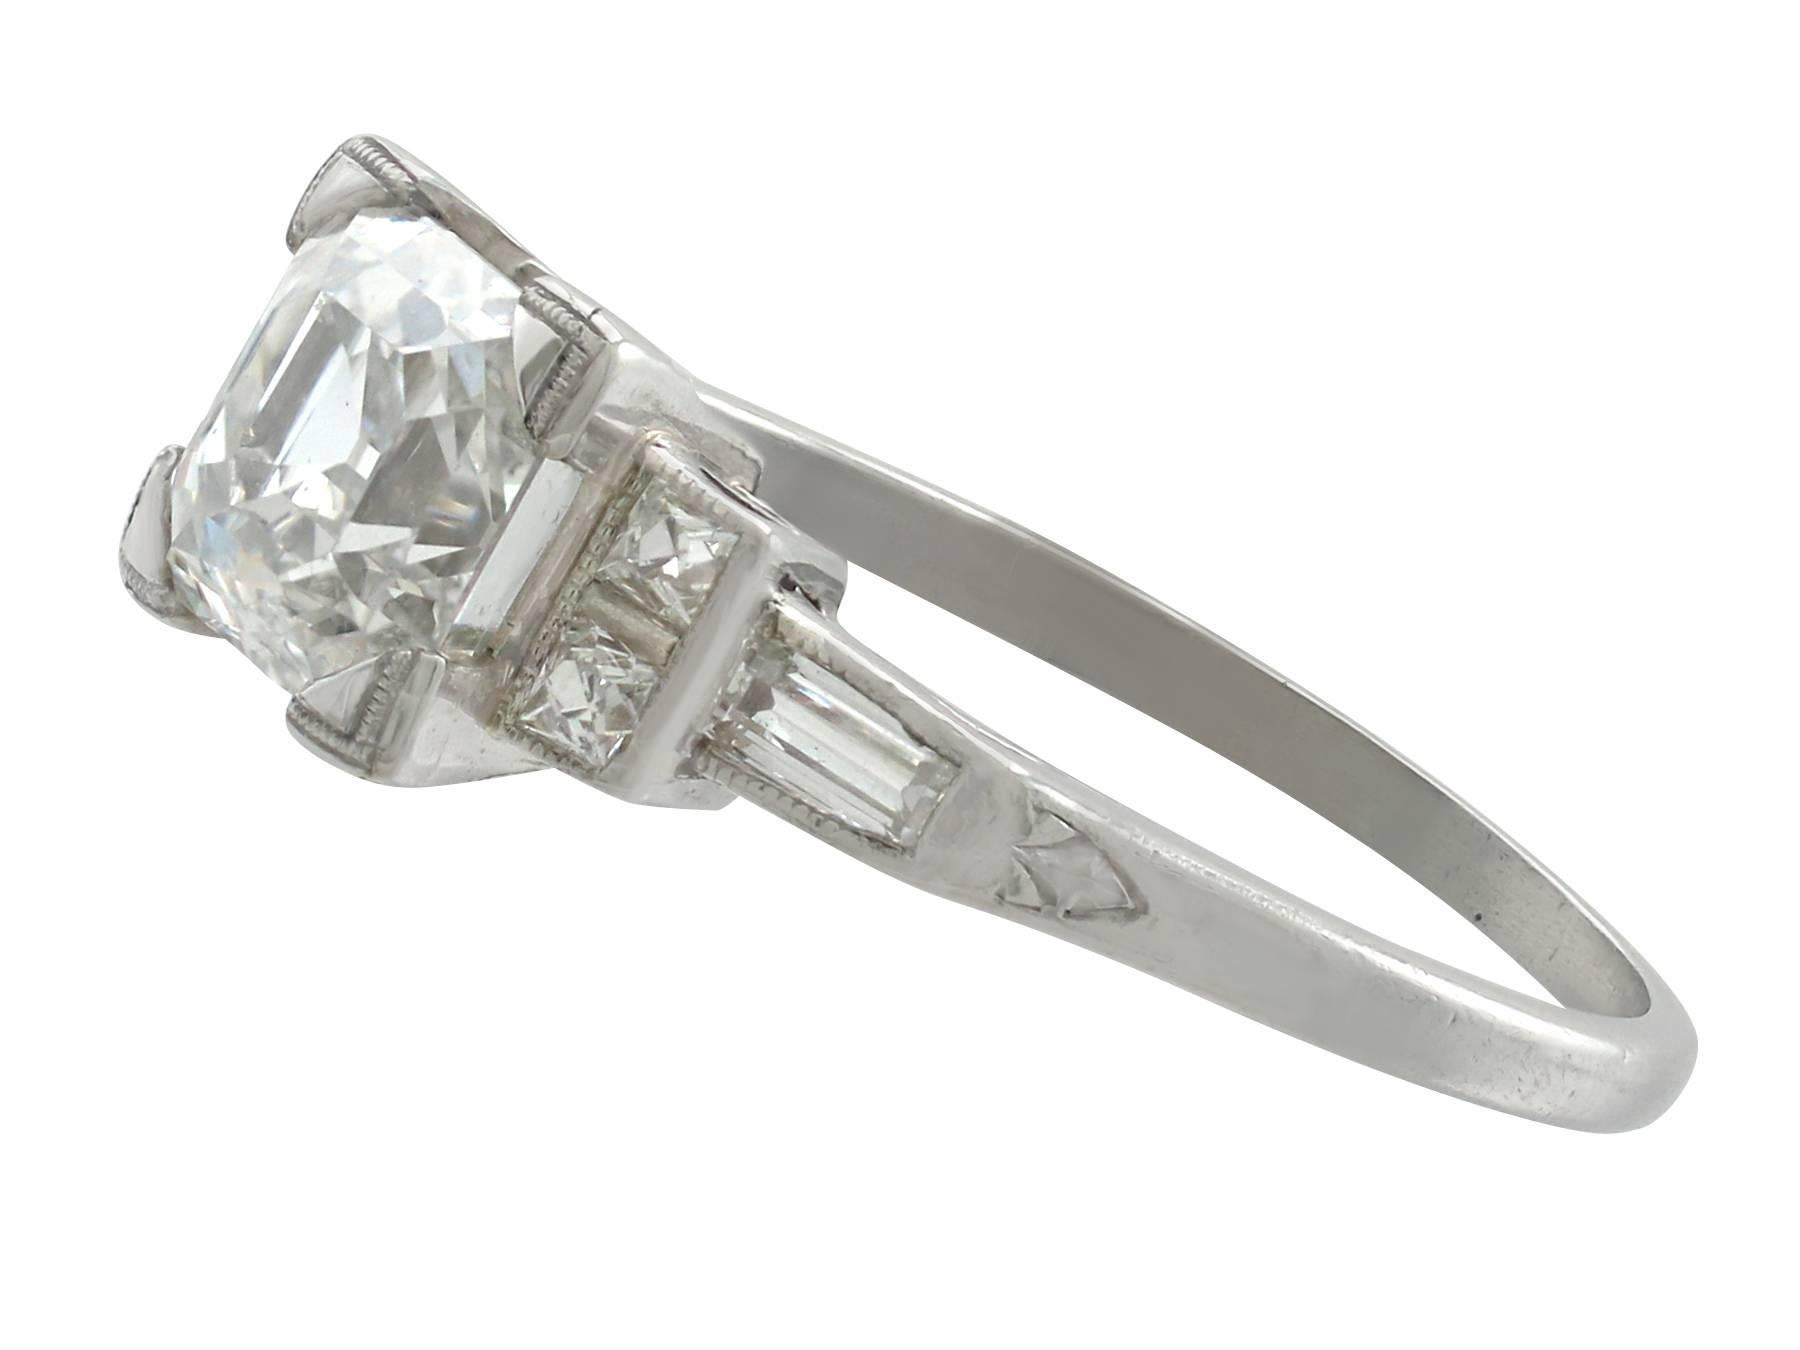 1930s 1.76 Carat Diamond and Platinum Solitaire Engagement Ring In Excellent Condition In Jesmond, Newcastle Upon Tyne